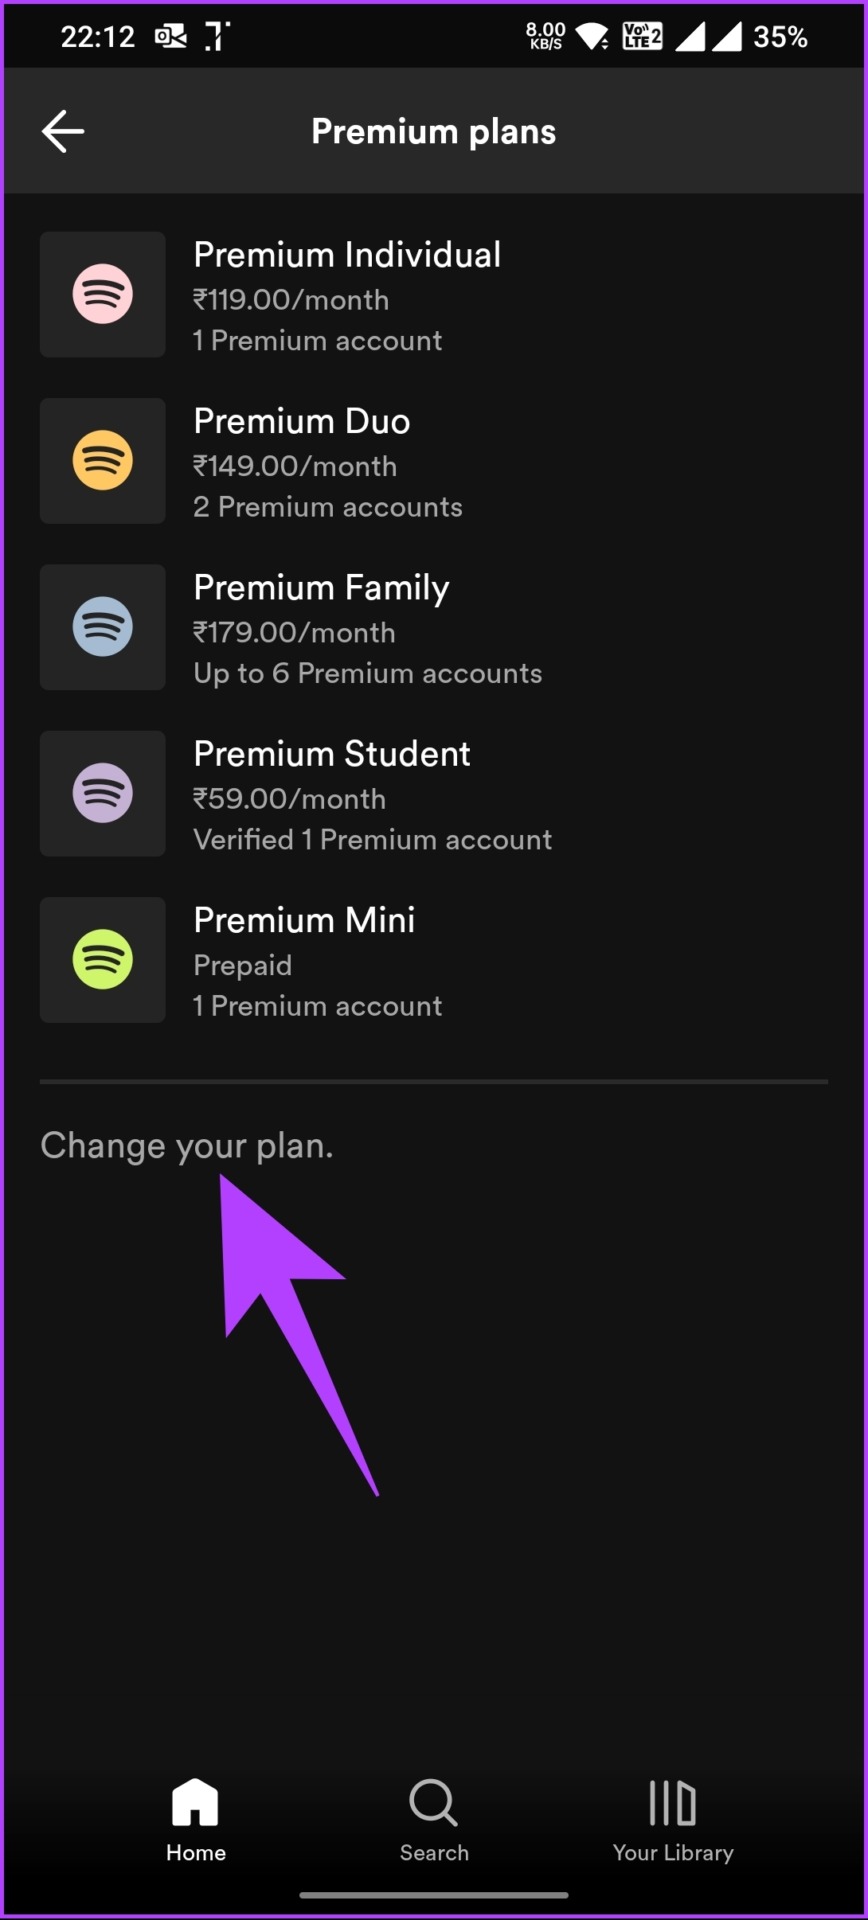 choose the 'Change your plan' option